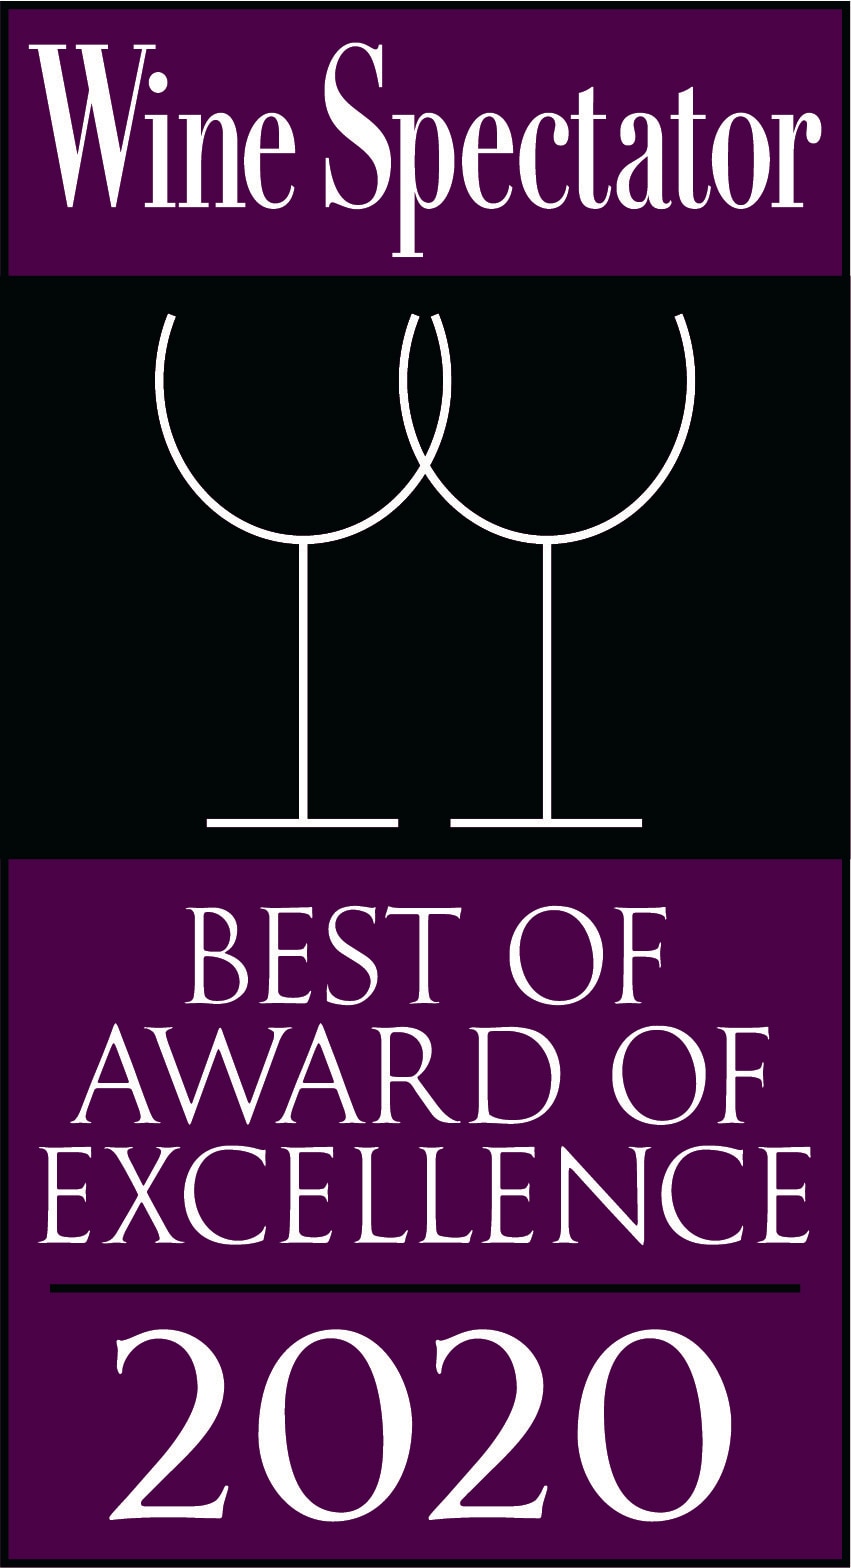 Wine Spectator Best of Award of Excellence 2020